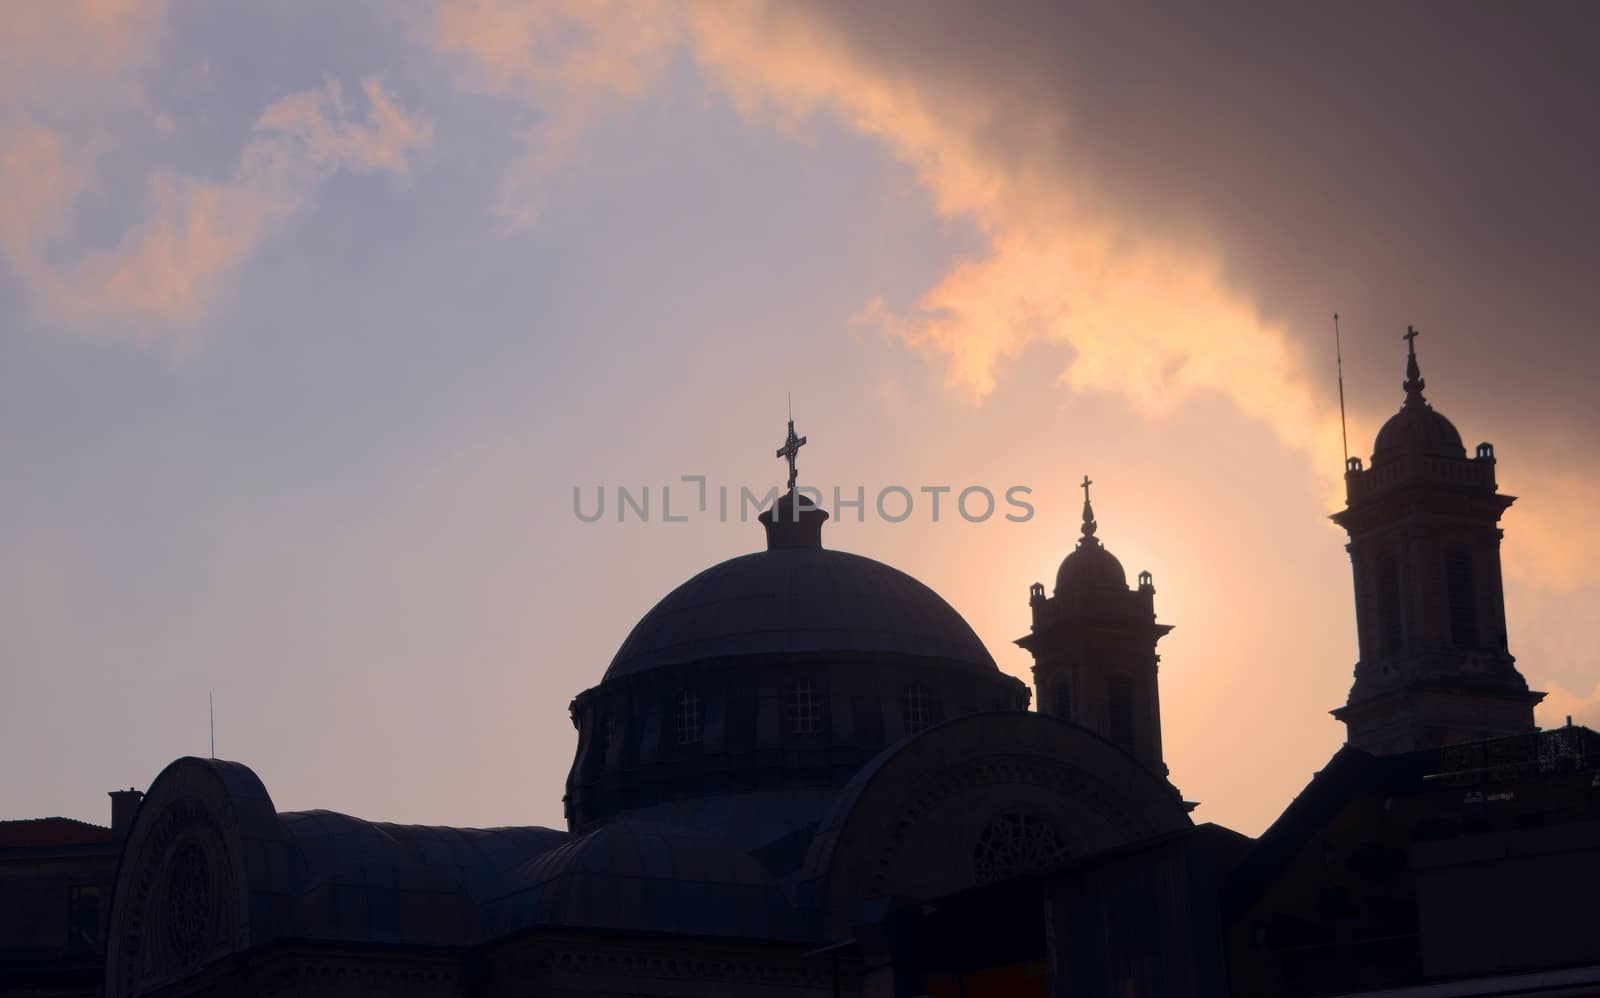 Church dome and christian crosses silhouetted against the afternoon sky in Istambul, Turkey.